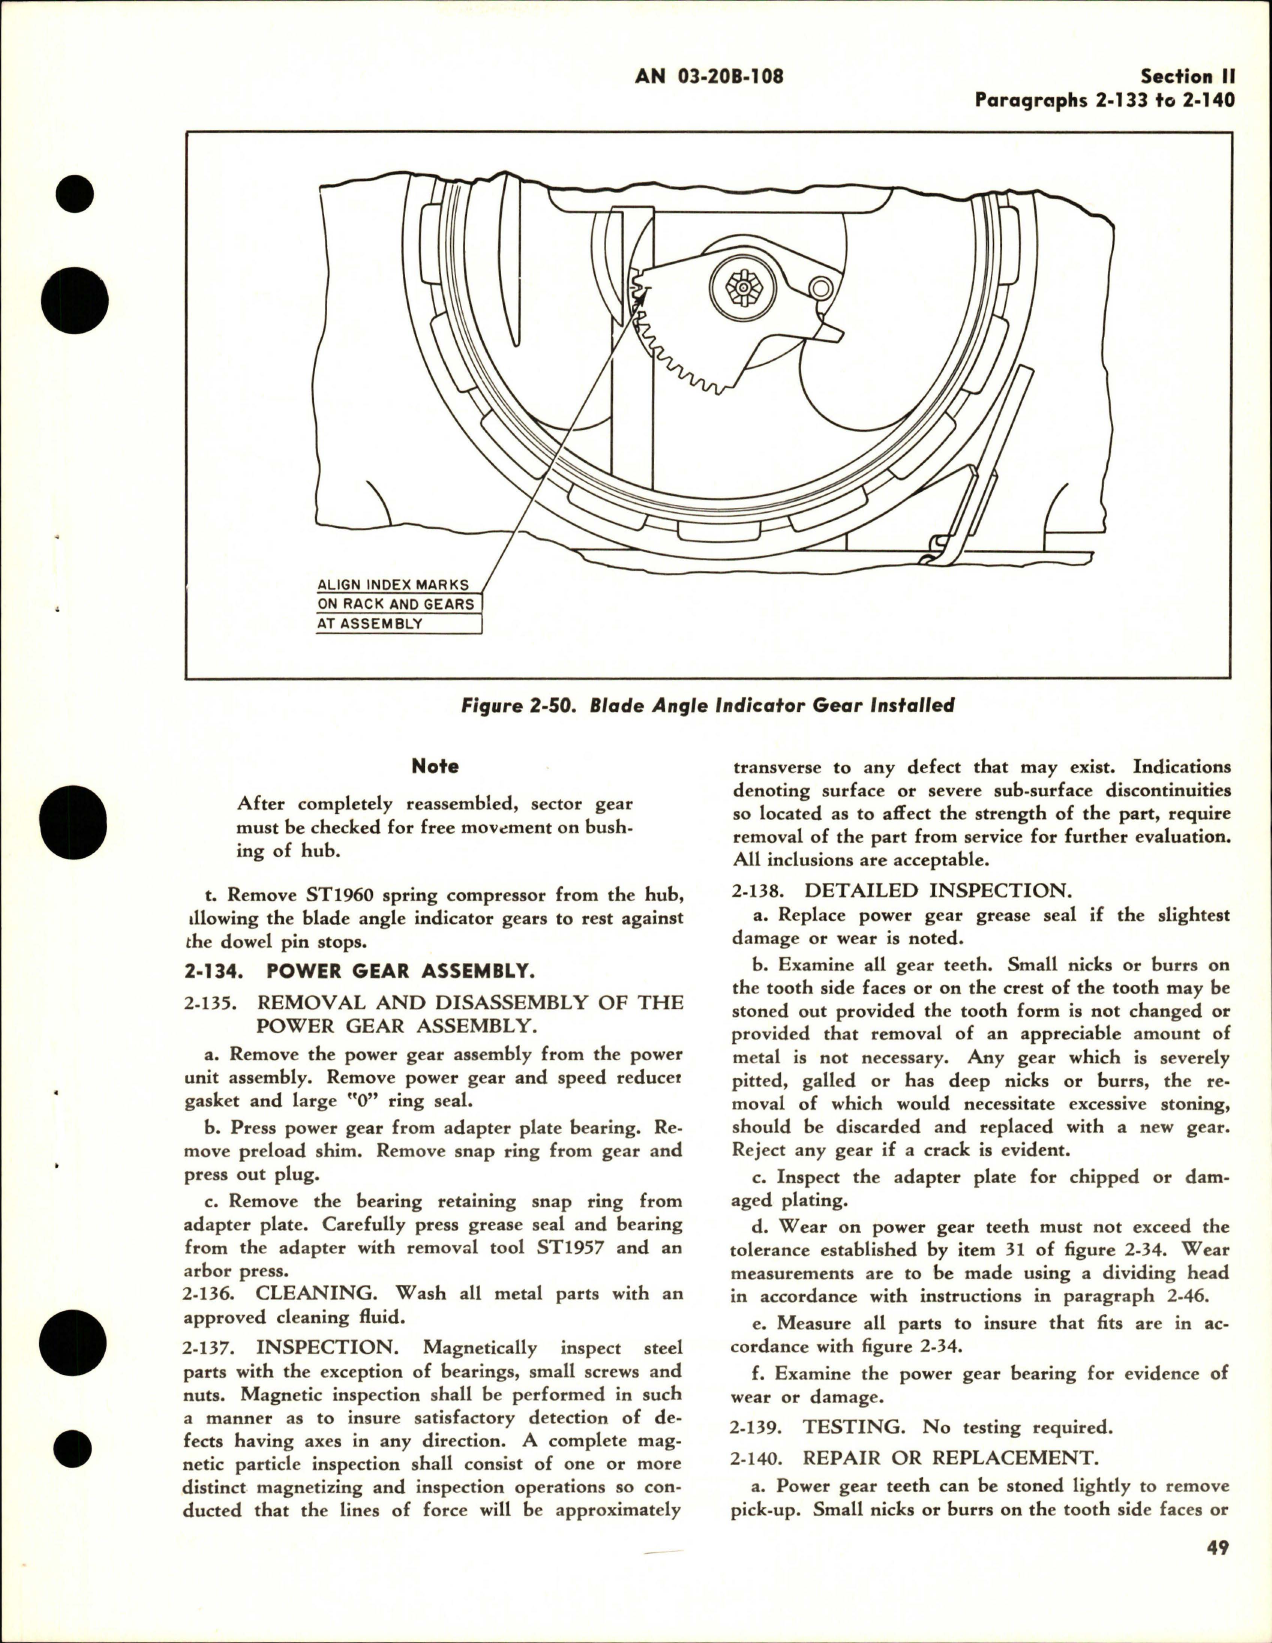 Sample page 5 from AirCorps Library document: Overhaul Instructions for Pitch Lever Type Electric Propeller - Model C42S-C24 